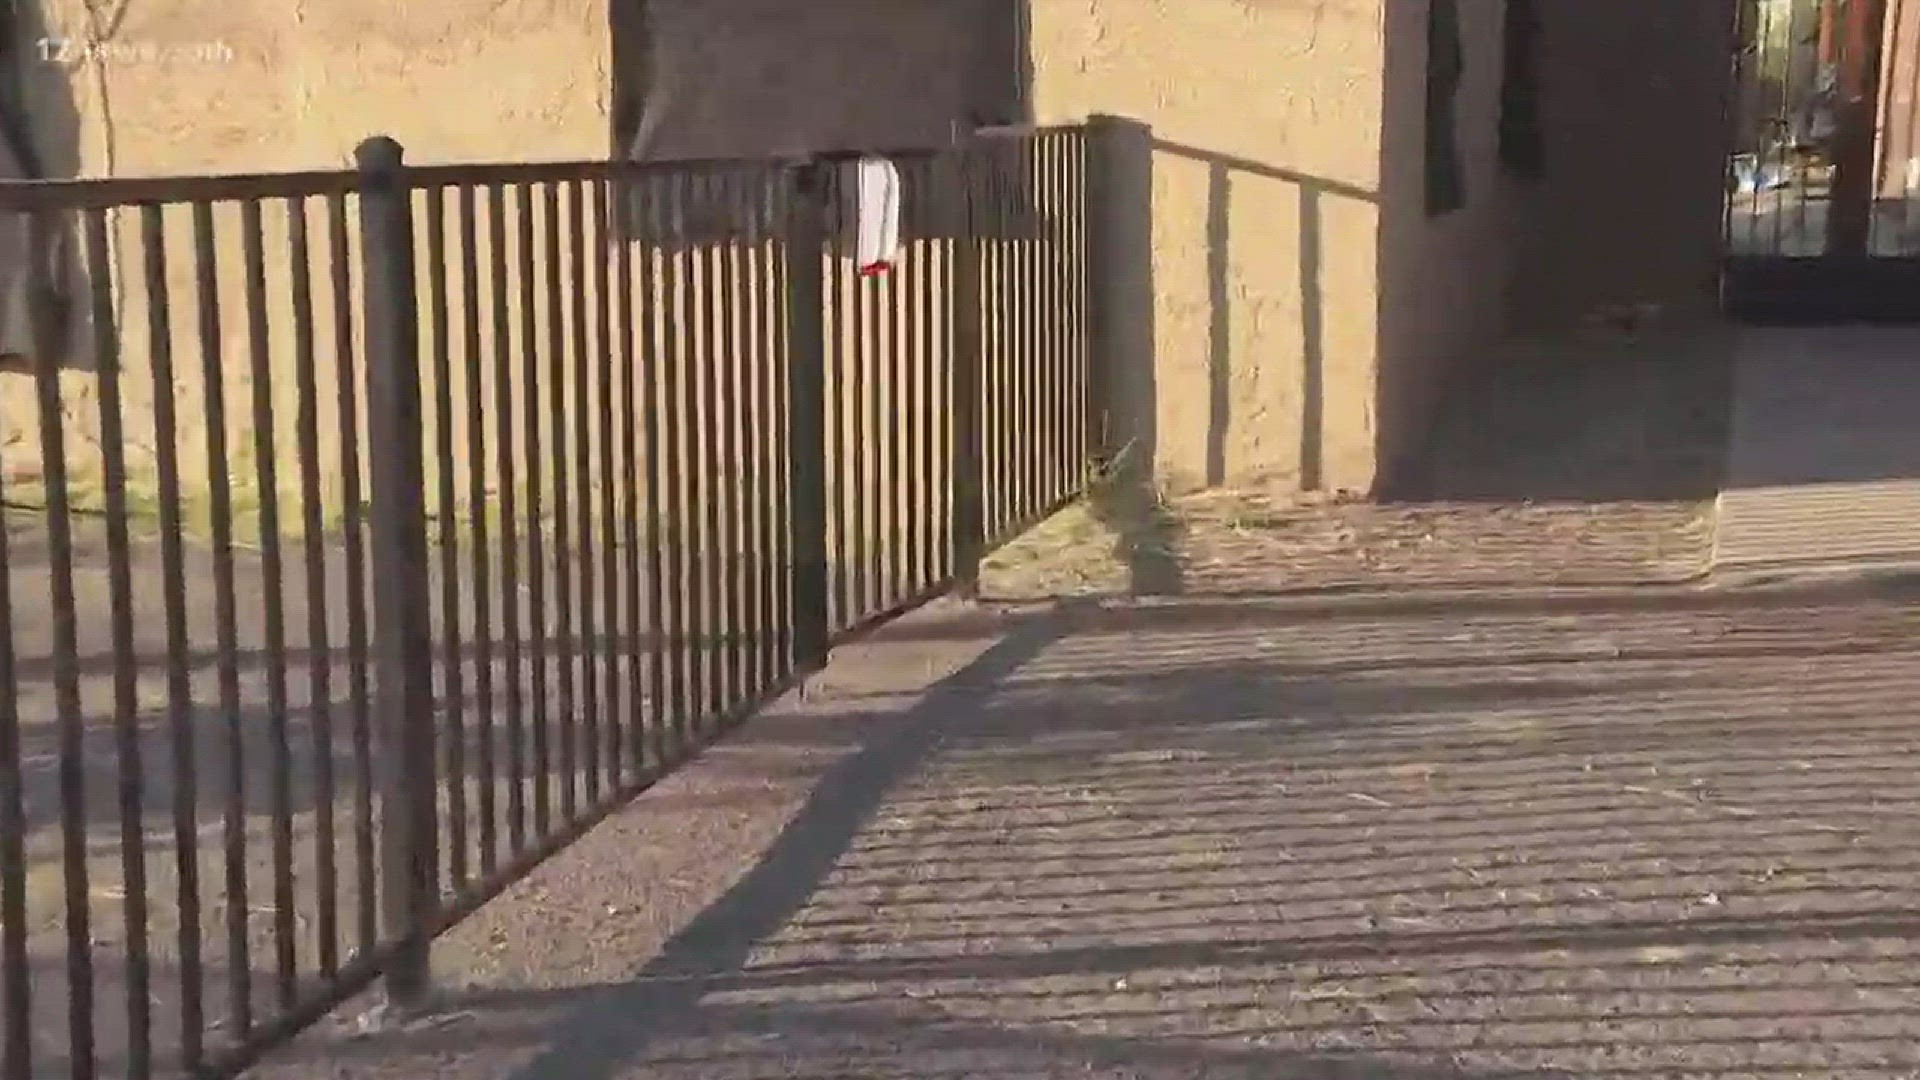 Phoenix police are investigating a dead dog found hanging on a fence near 23rd and Devonshire avenues.